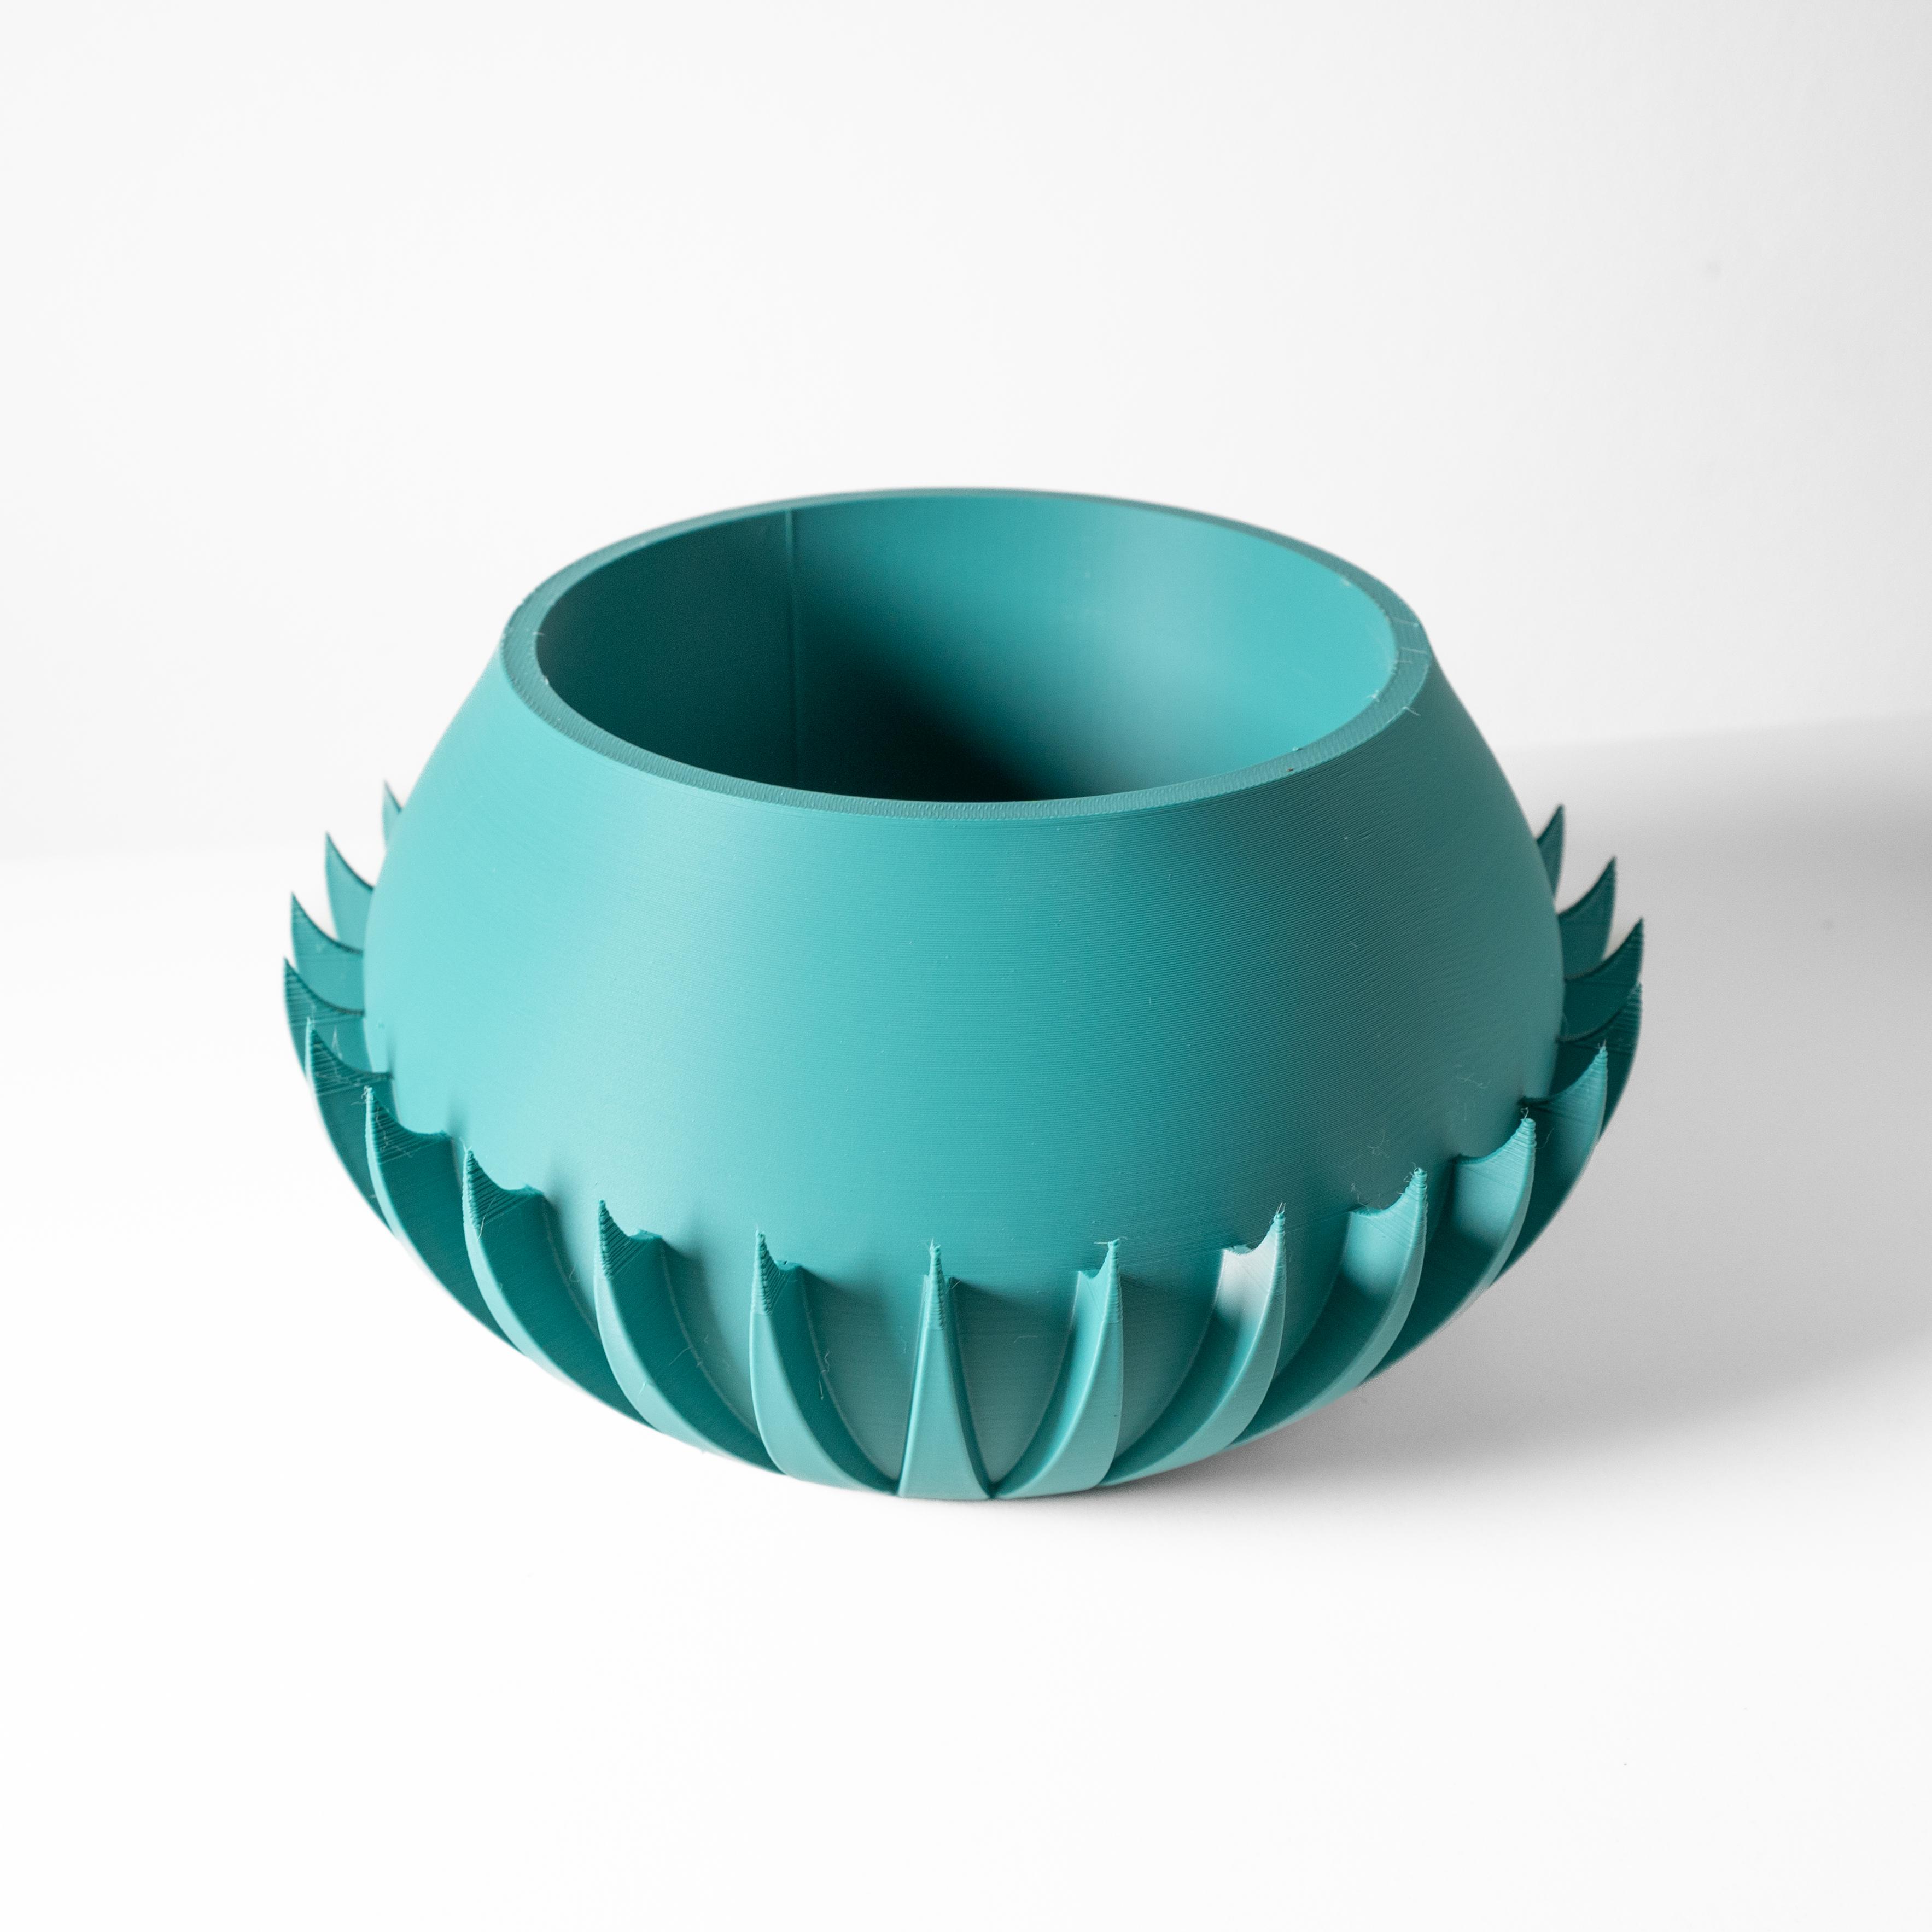 The Lavis Planter Pot with Drainage Tray & Stand: Modern and Unique Home Decor for Plants 3d model